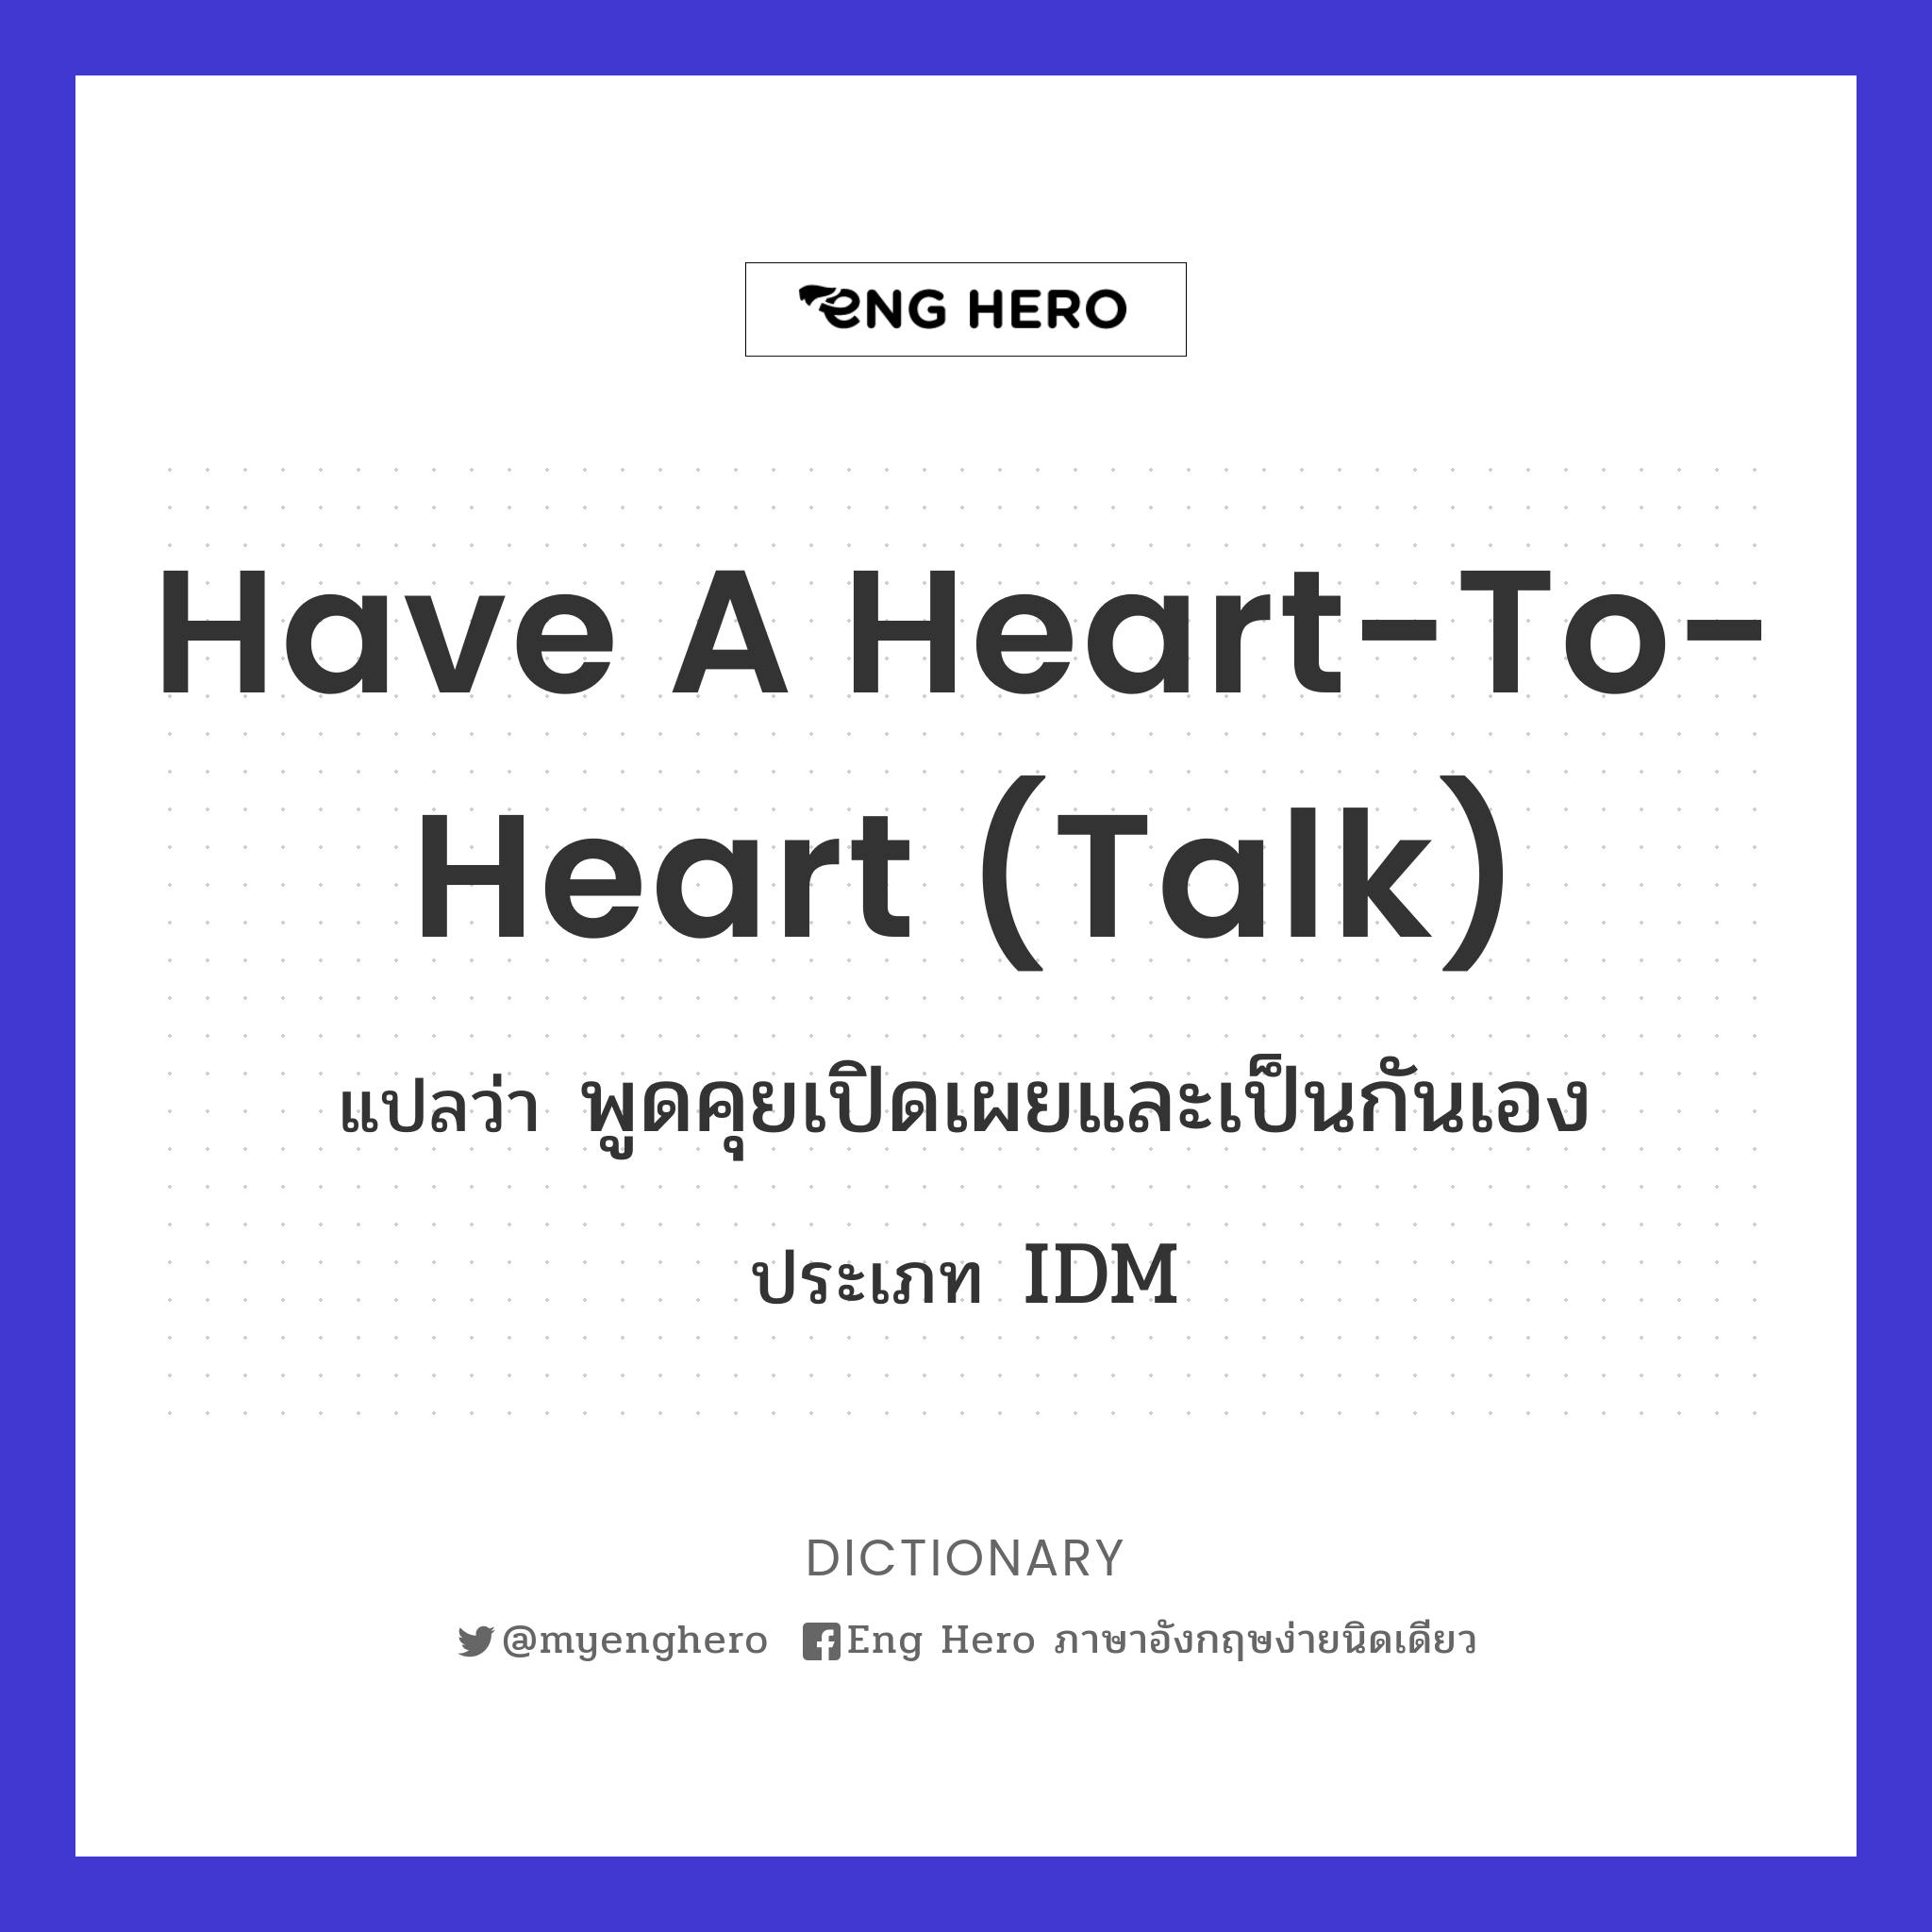 have a heart-to-heart (talk)